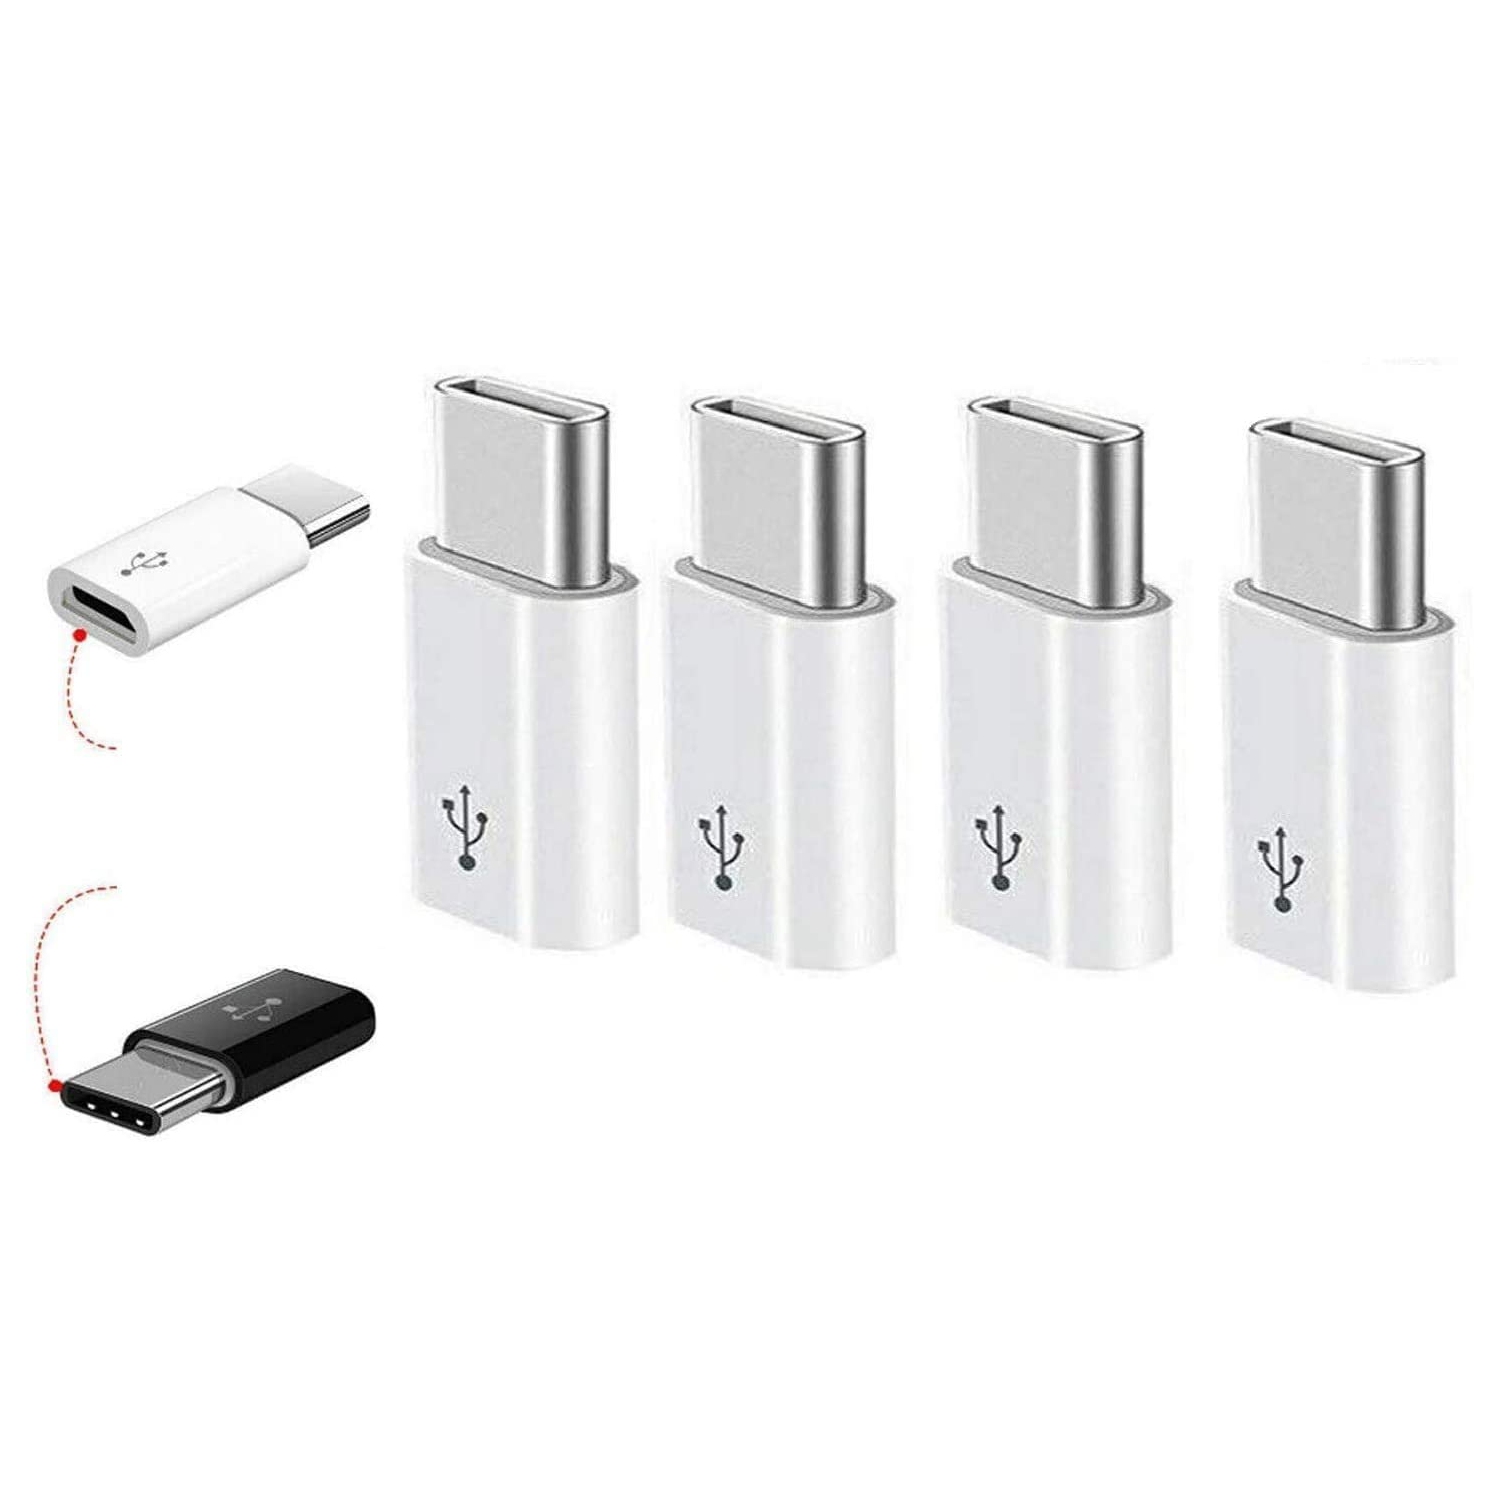 4 Pack White Micro USB to USB C Adapter, USB Type C Adapter Convert Connector with Resistor, Fast Charging for Samsung Galaxy S10 S9 S8 Plus Note 9 8, MacBook, LG V30 G5 G6, Moto Z2 Play